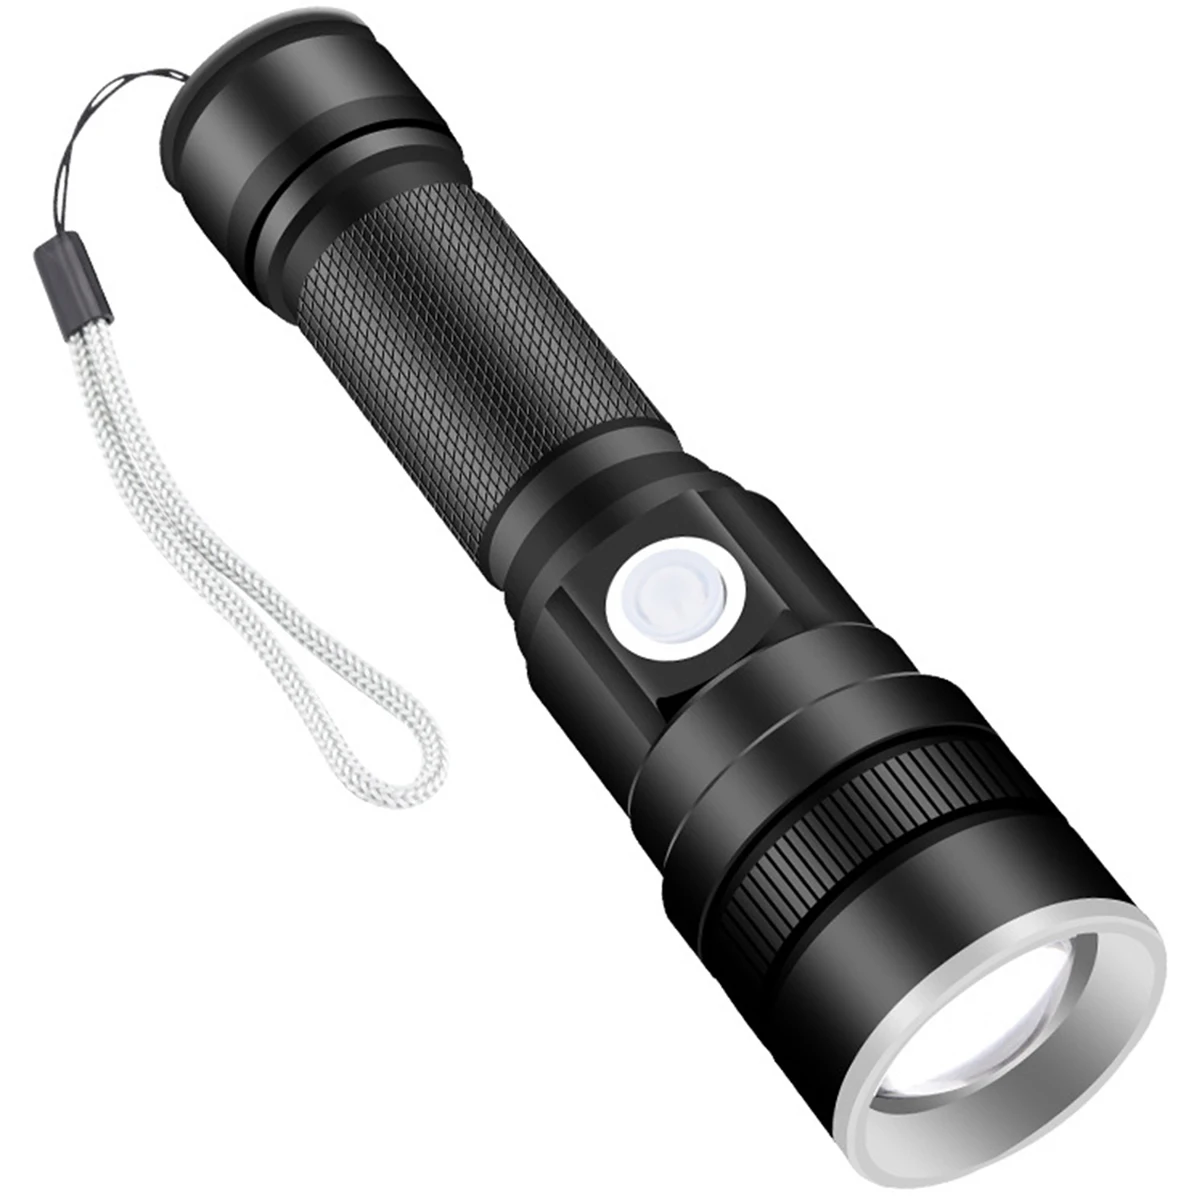 

LED Flashlight Telescopic Zoom Torchlight 3 Lighting Modes LED Torch USB Chargeable LED Flash Light IPX6 Waterproof Torch Lamp